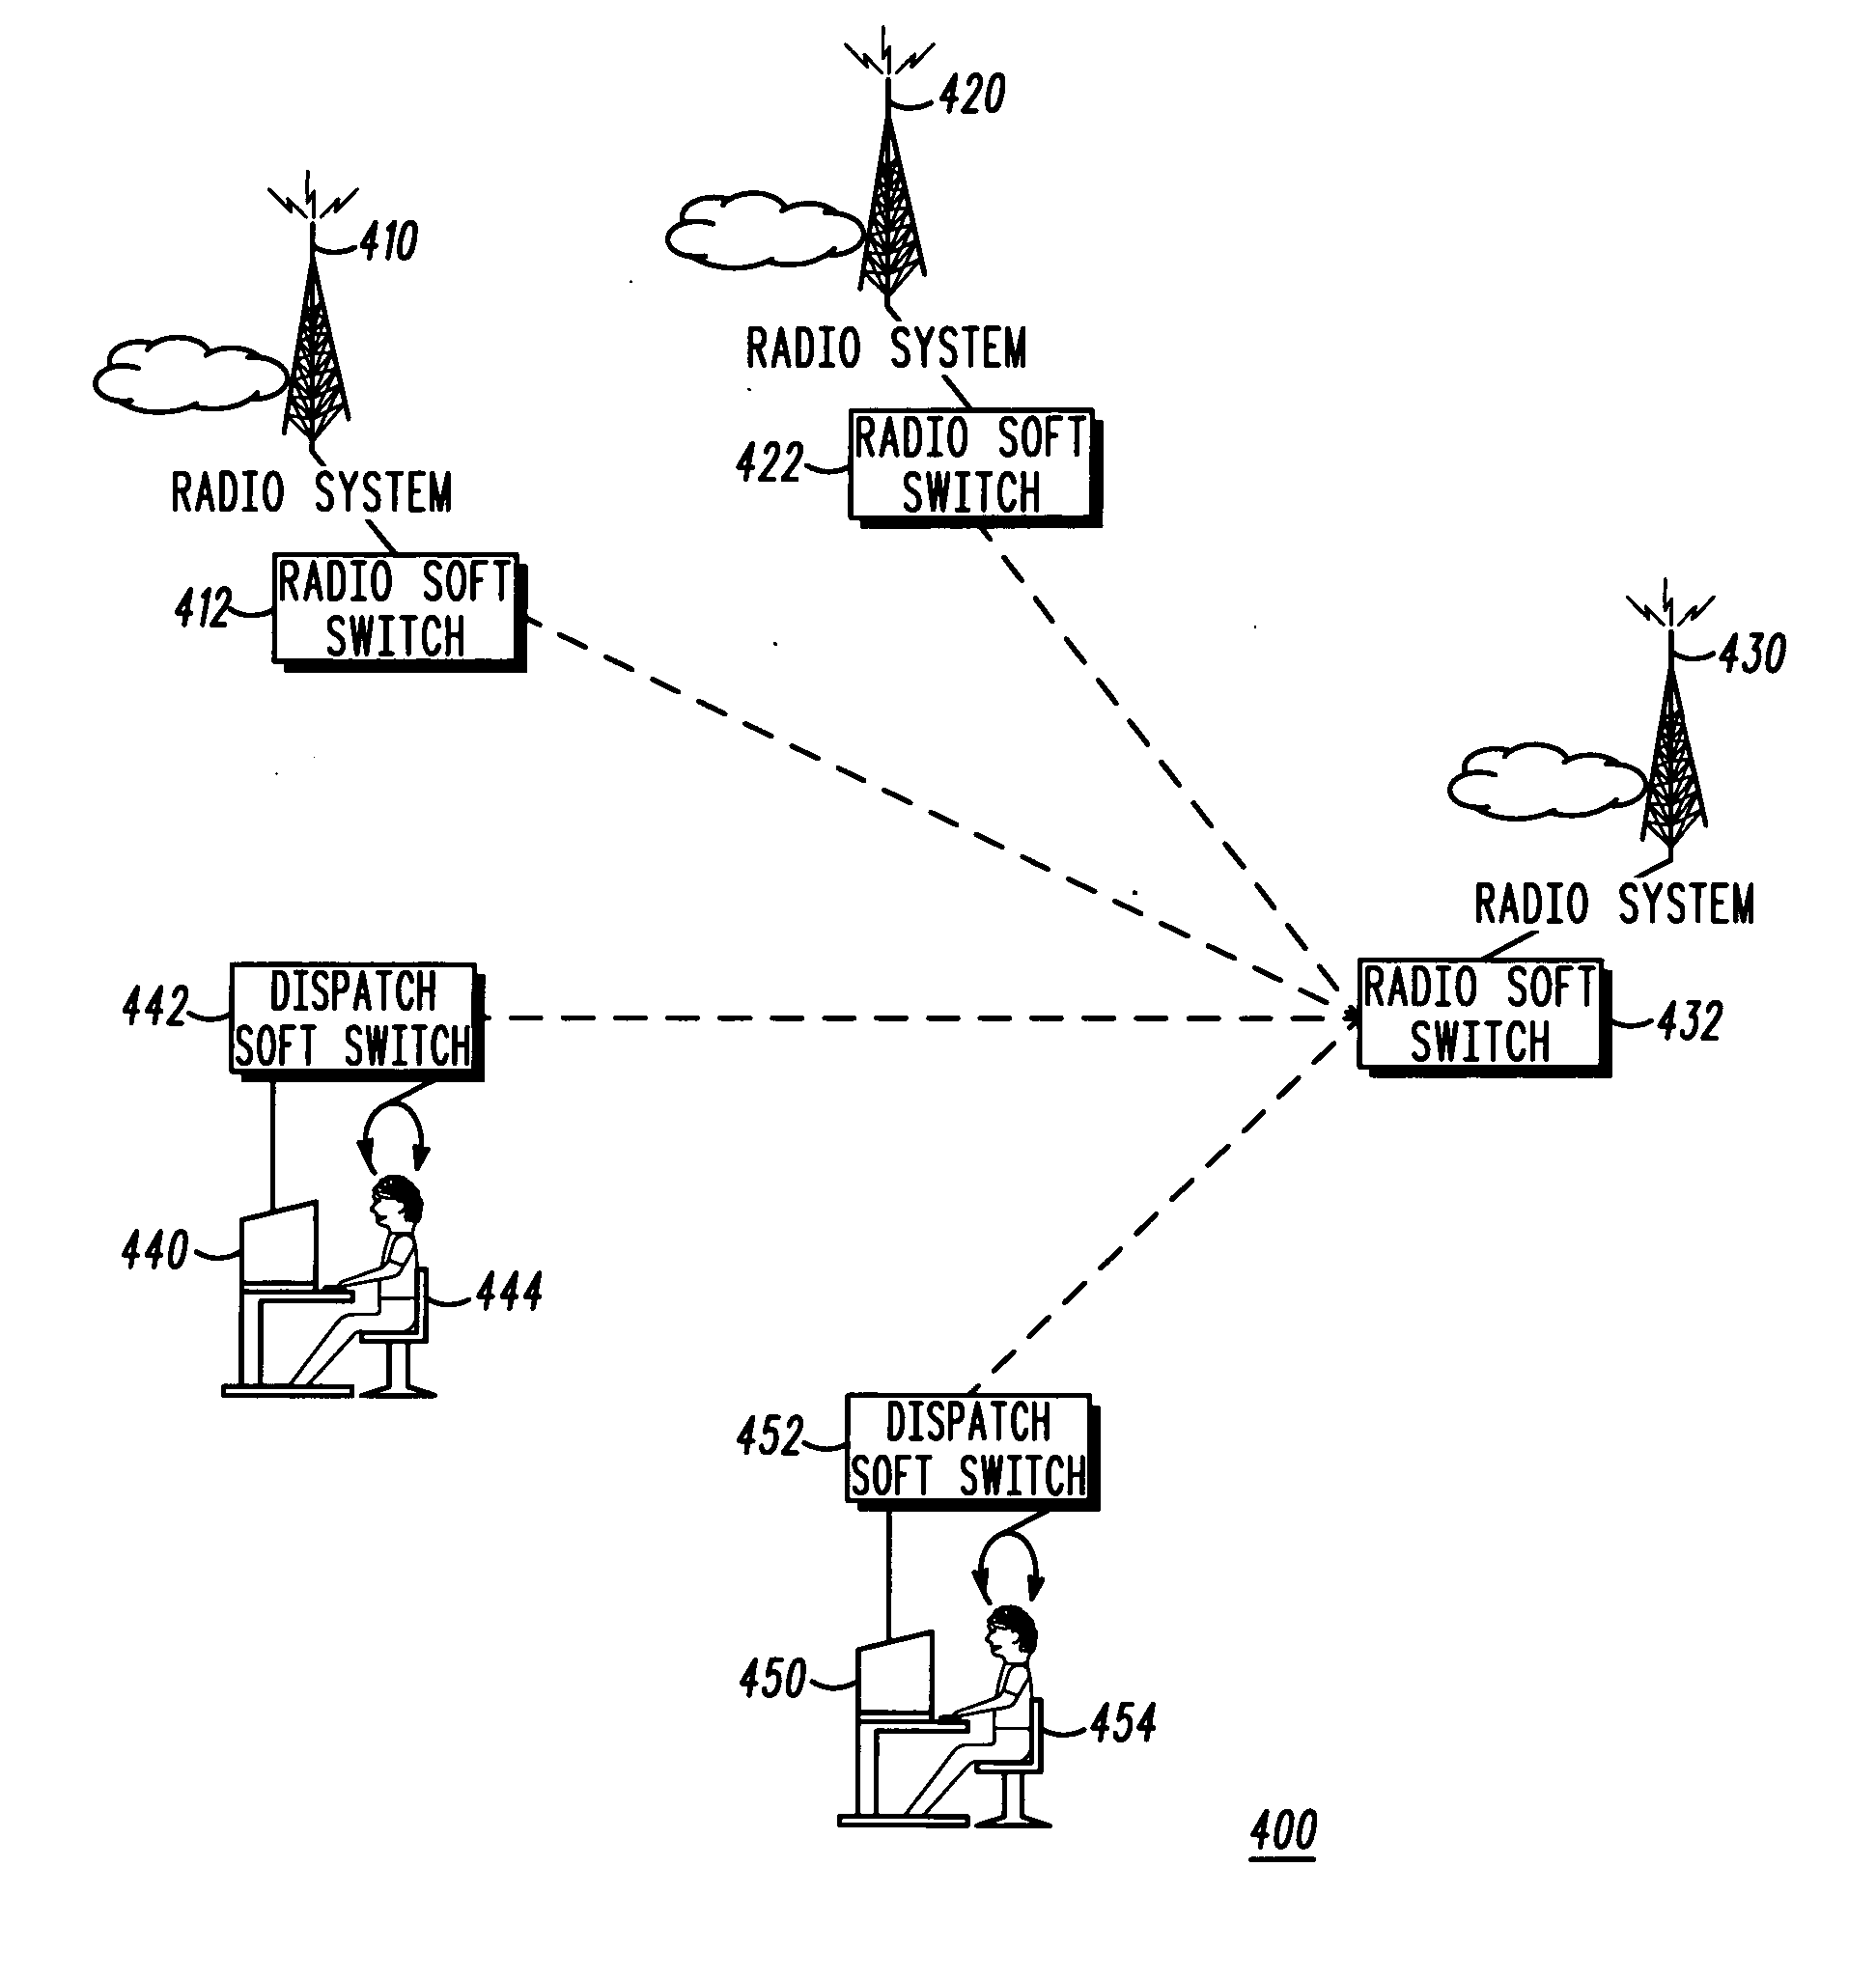 Method and apparatus for session layer framing to enable interoperability between packet-switched systems